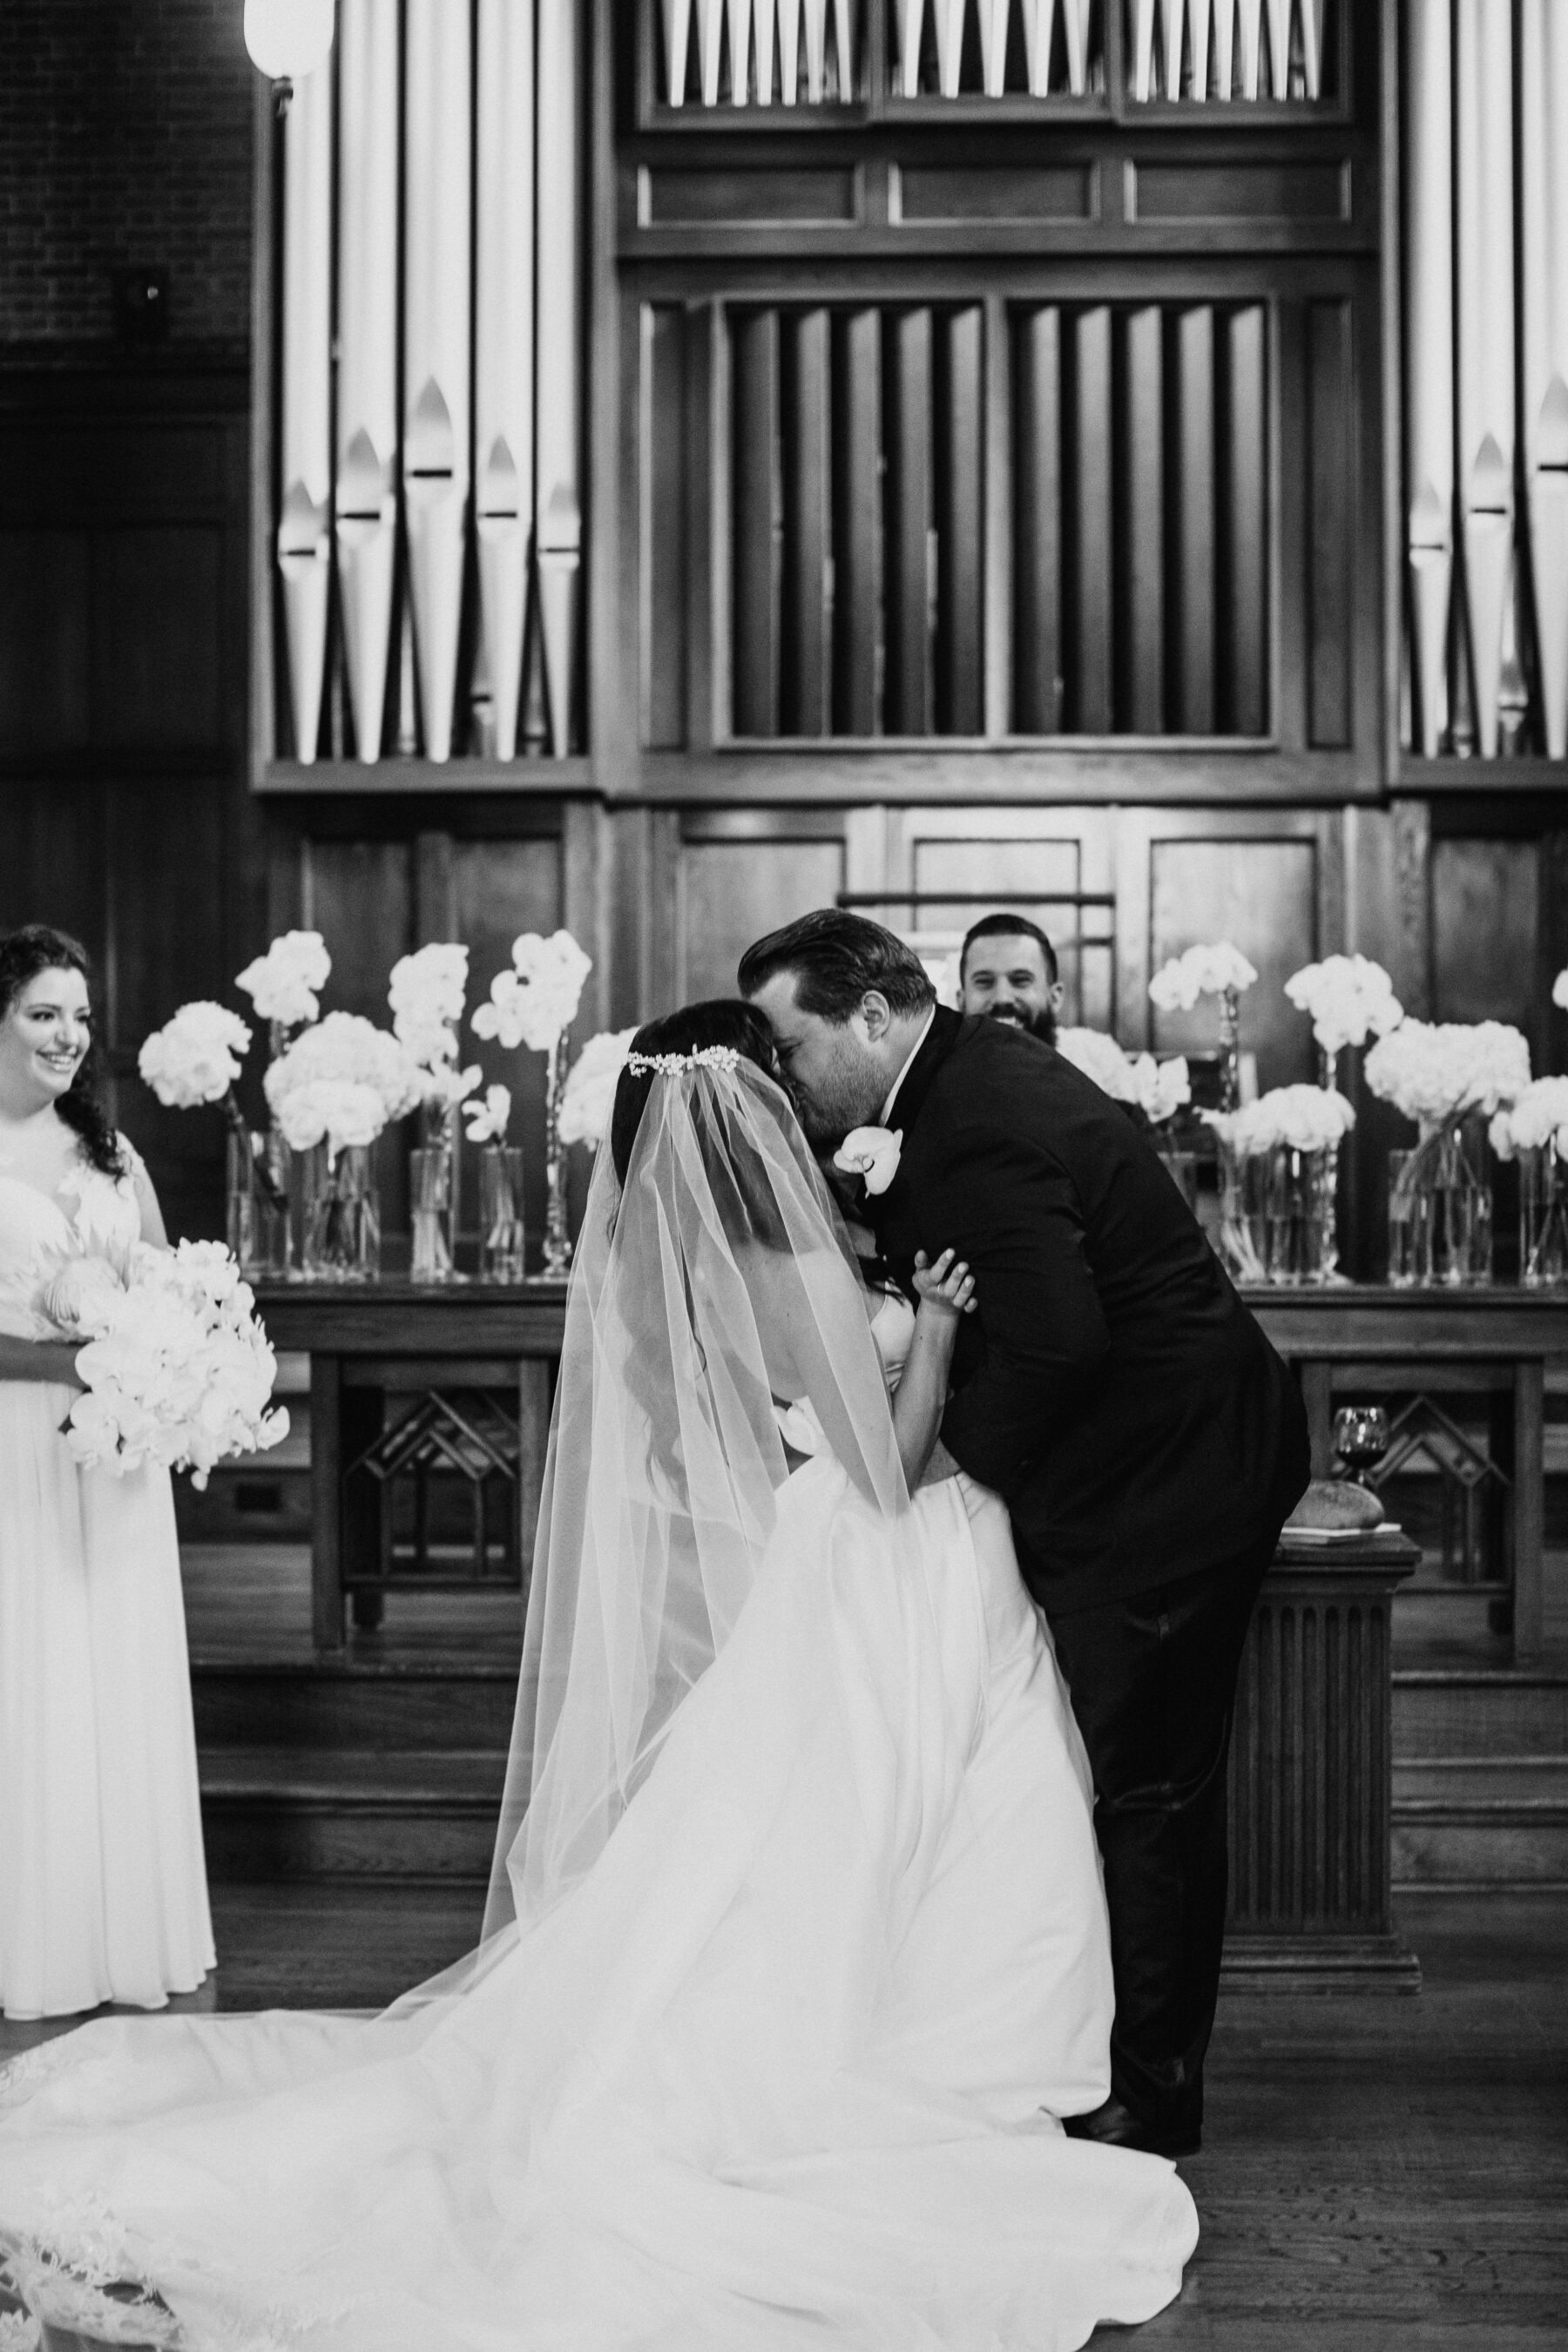 The Bell Tower wedding ceremony | Nashville Bride Guide